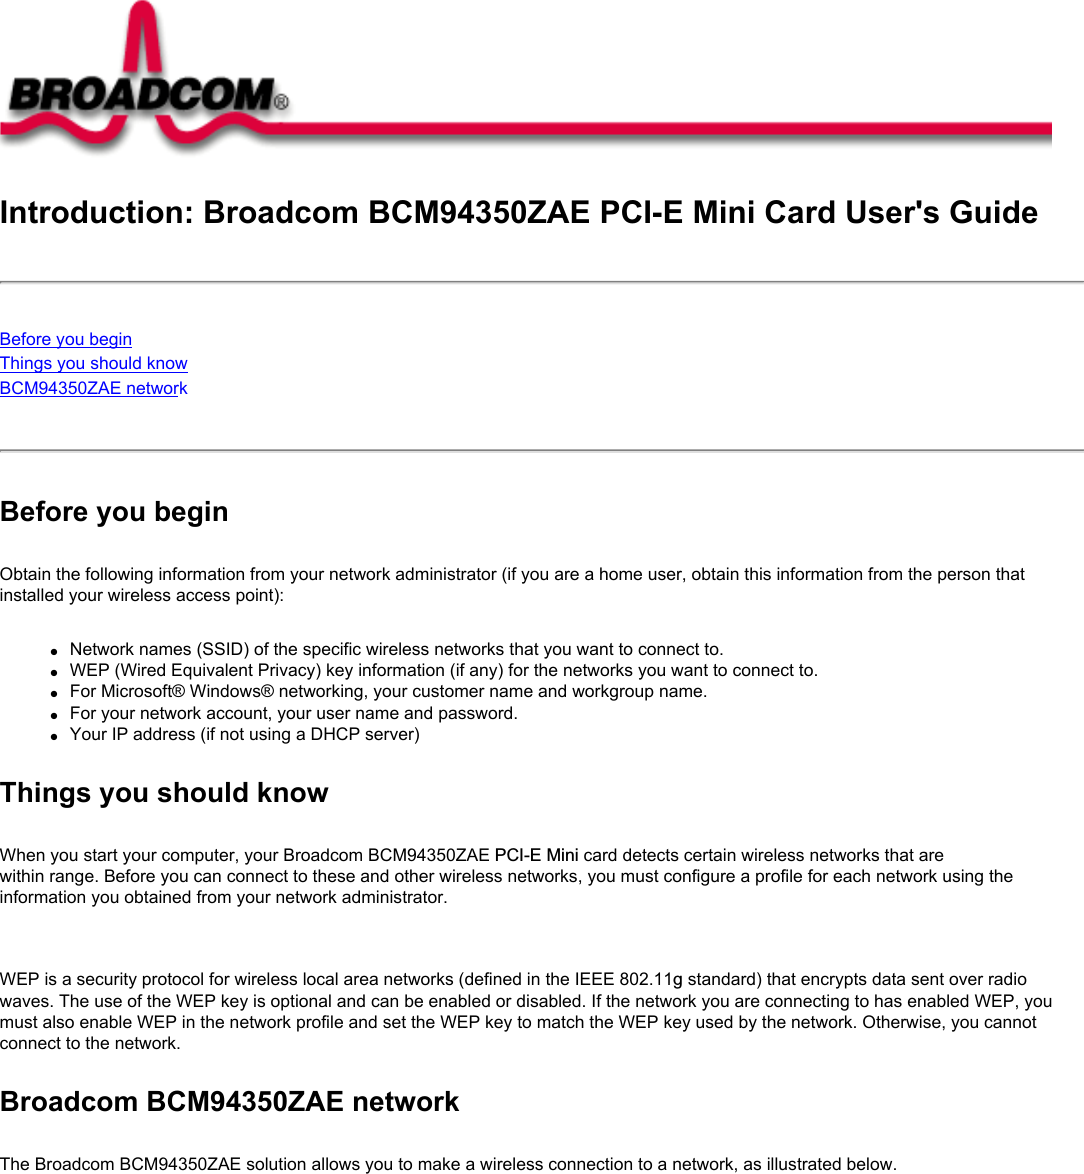 Introduction: Broadcom BCM94350ZAE PCI-E Mini Card User&apos;s GuideBefore you beginThings you should knowBCM94350ZAE network Before you beginObtain the following information from your network administrator (if you are a home user, obtain this information from the person that installed your wireless access point):●     Network names (SSID) of the specific wireless networks that you want to connect to.●     WEP (Wired Equivalent Privacy) key information (if any) for the networks you want to connect to.●     For Microsoft® Windows® networking, your customer name and workgroup name.●     For your network account, your user name and password.●     Your IP address (if not using a DHCP server)Things you should knowWhen you start your computer, your Broadcom BCM94350ZAE PCI-E Mini card detects certain wireless networks that are within range. Before you can connect to these and other wireless networks, you must configure a profile for each network using the information you obtained from your network administrator.   WEP is a security protocol for wireless local area networks (defined in the IEEE 802.11g standard) that encrypts data sent over radio waves. The use of the WEP key is optional and can be enabled or disabled. If the network you are connecting to has enabled WEP, you must also enable WEP in the network profile and set the WEP key to match the WEP key used by the network. Otherwise, you cannot connect to the network.Broadcom BCM94350ZAE networkThe Broadcom BCM94350ZAE solution allows you to make a wireless connection to a network, as illustrated below.